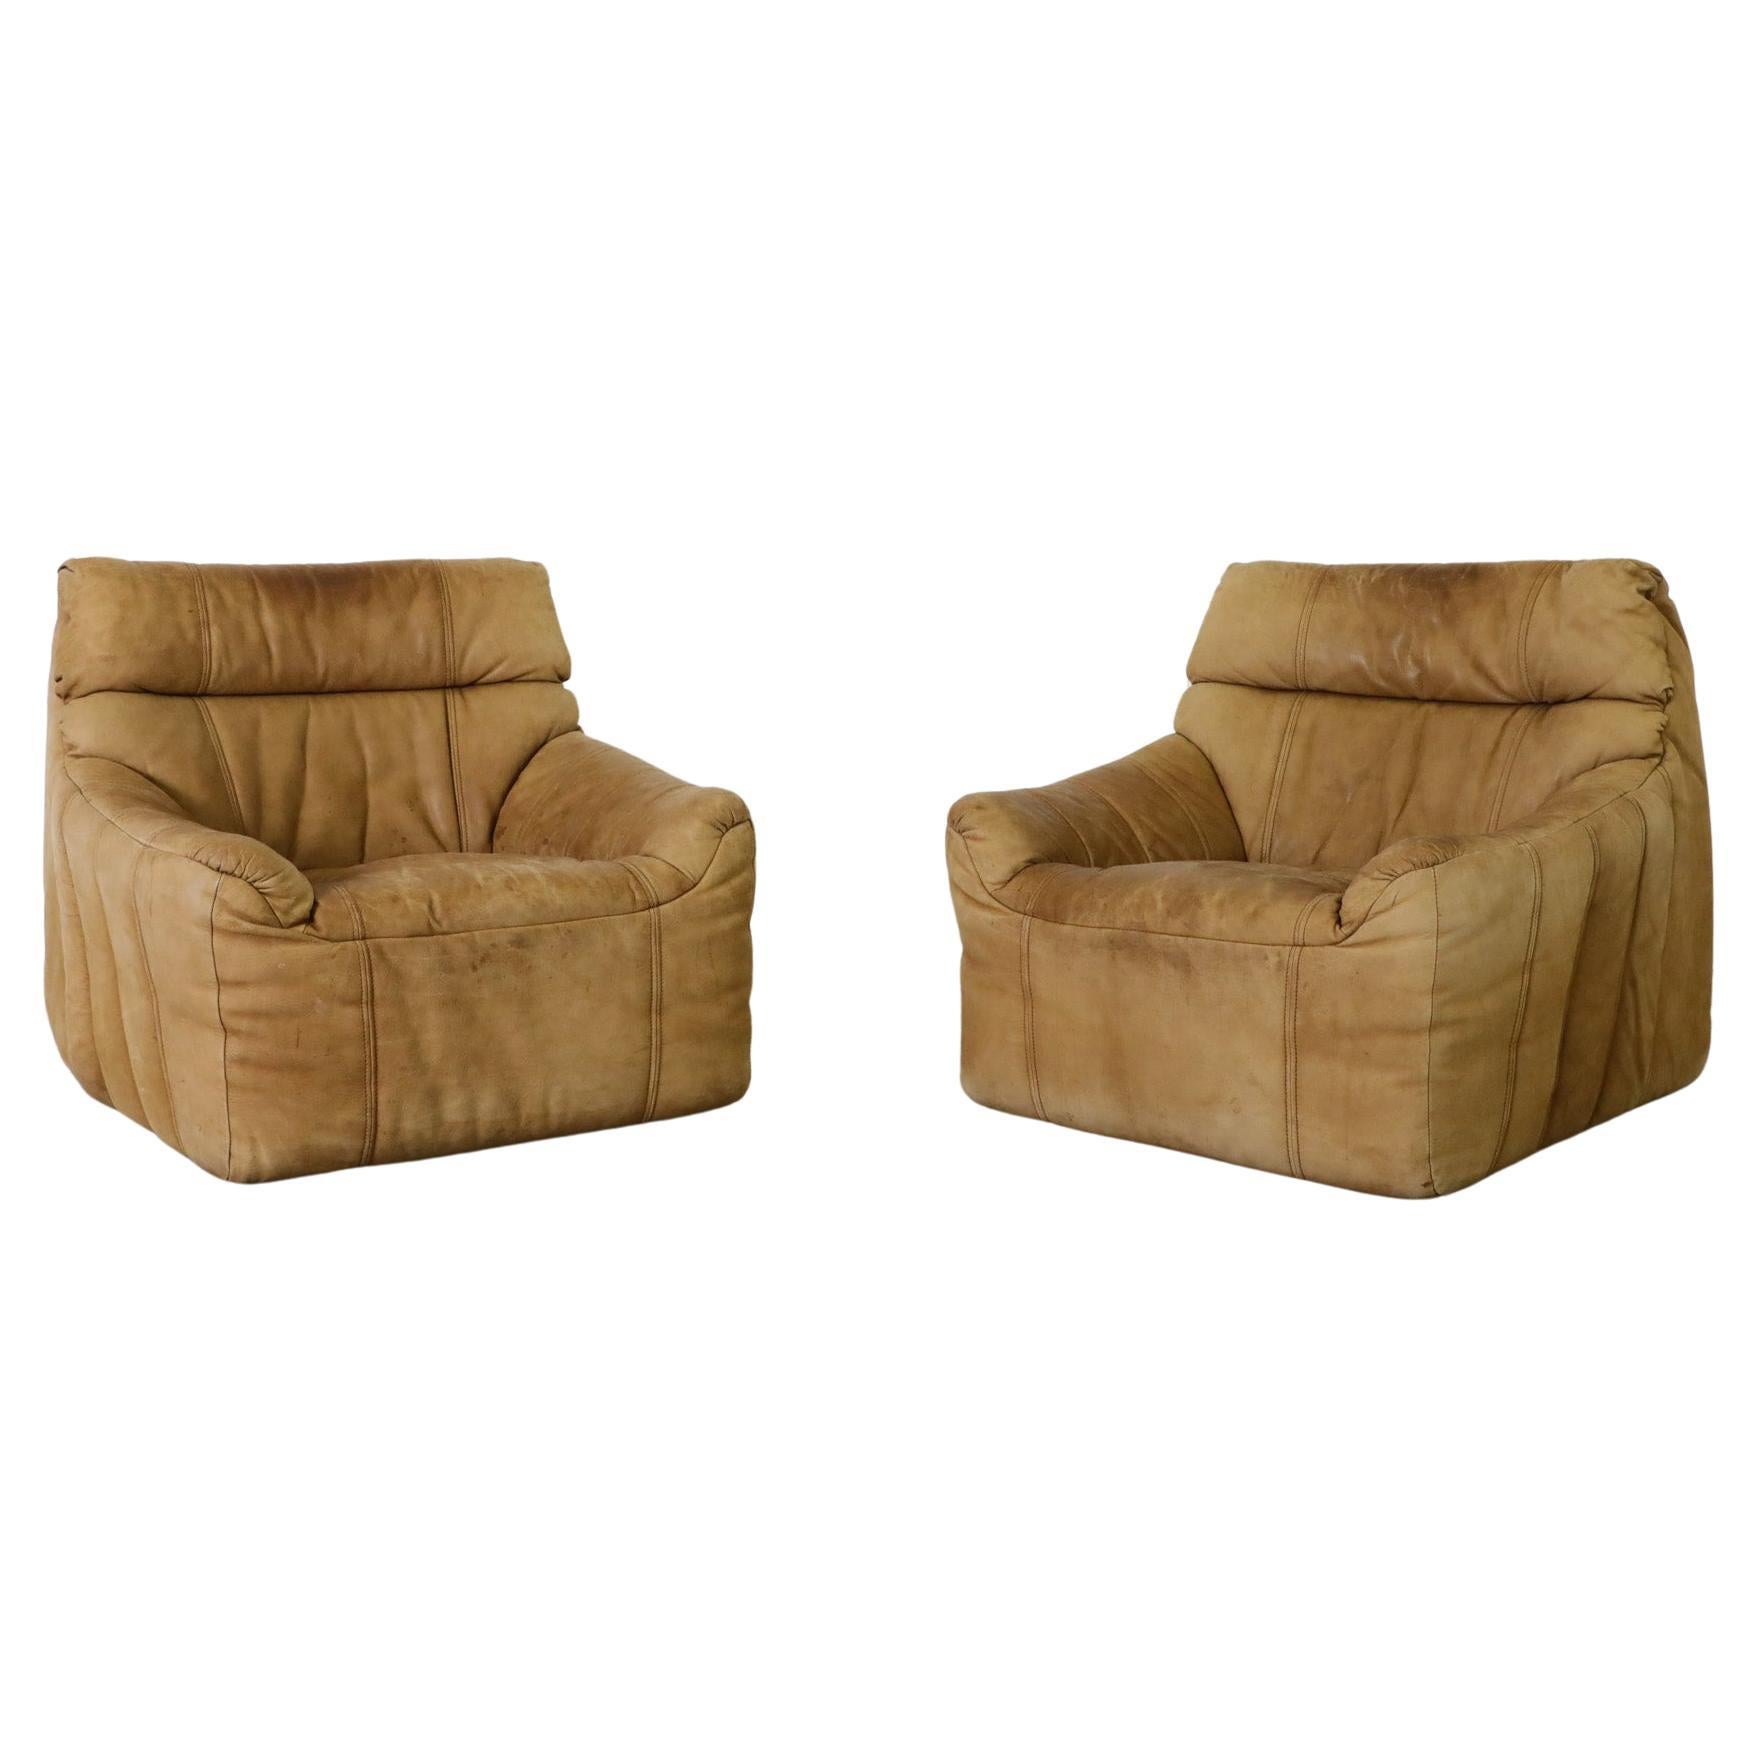 Rolf Benz Lounge Chairs